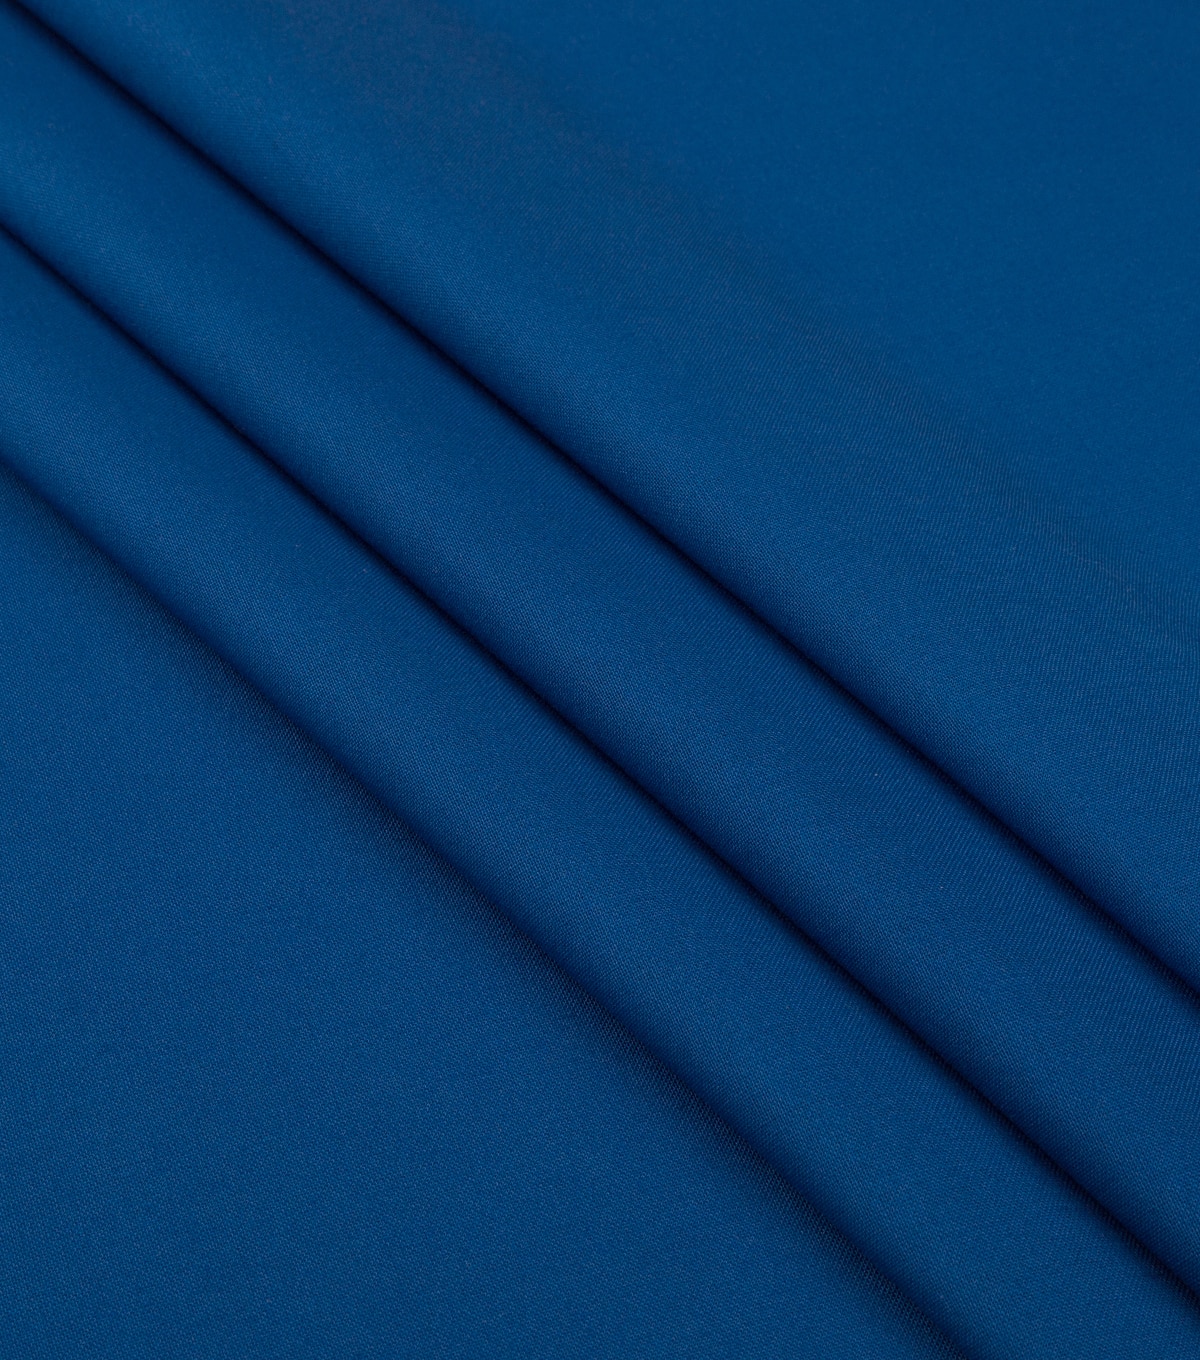 Wide Solid Cotton Fabric 108" Classic Blue | JOANN